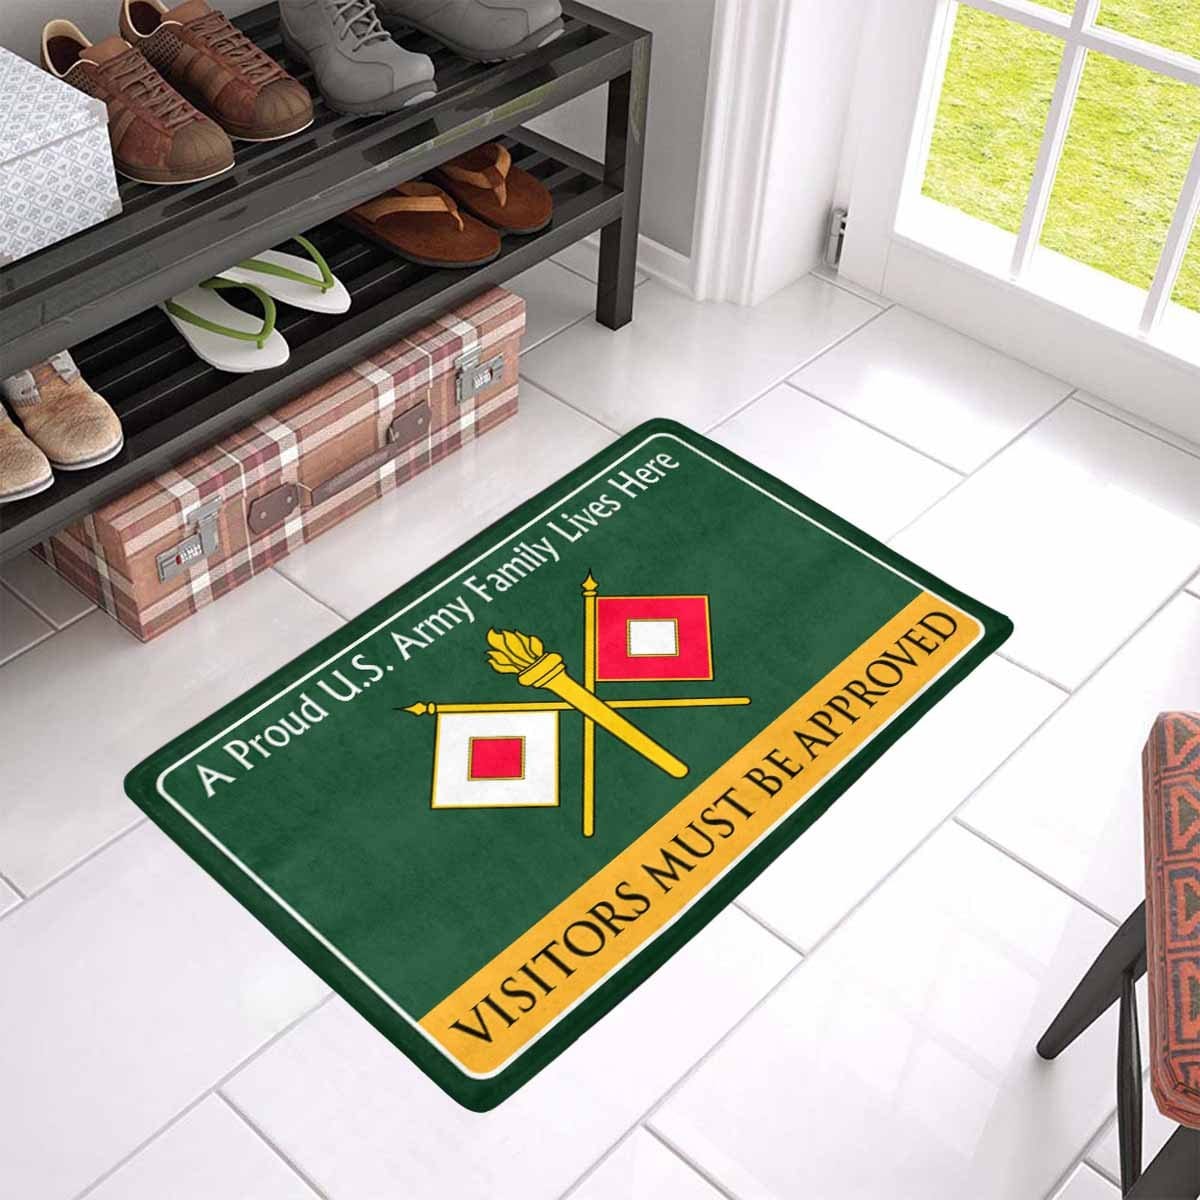 US Army Signal Corps Family Doormat - Visitors must be approved Doormat (23.6 inches x 15.7 inches)-Doormat-Army-Branch-Veterans Nation